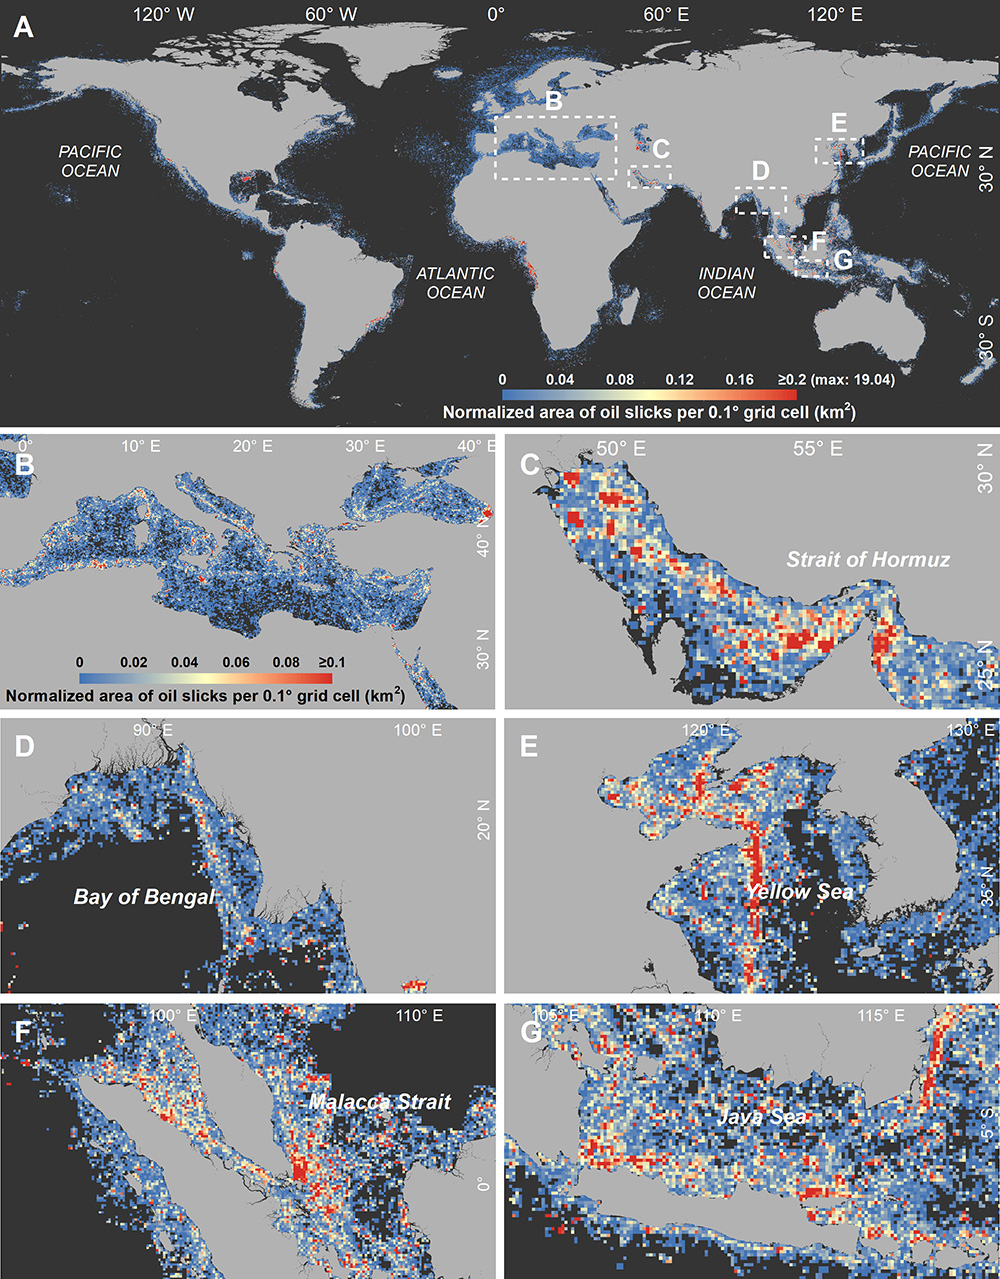 Global distribution of oil slicks (2014-2019).  (A) Normalized area of oil slicks in a 0.1 x 0.1 grid representing oil slick area per full-coverage SAR observation (synthetic aperture radar). (B to G) Enlarged views of areas in white dashed boxes in (A). High-density belts caused by oil pollution from ships can be observed.